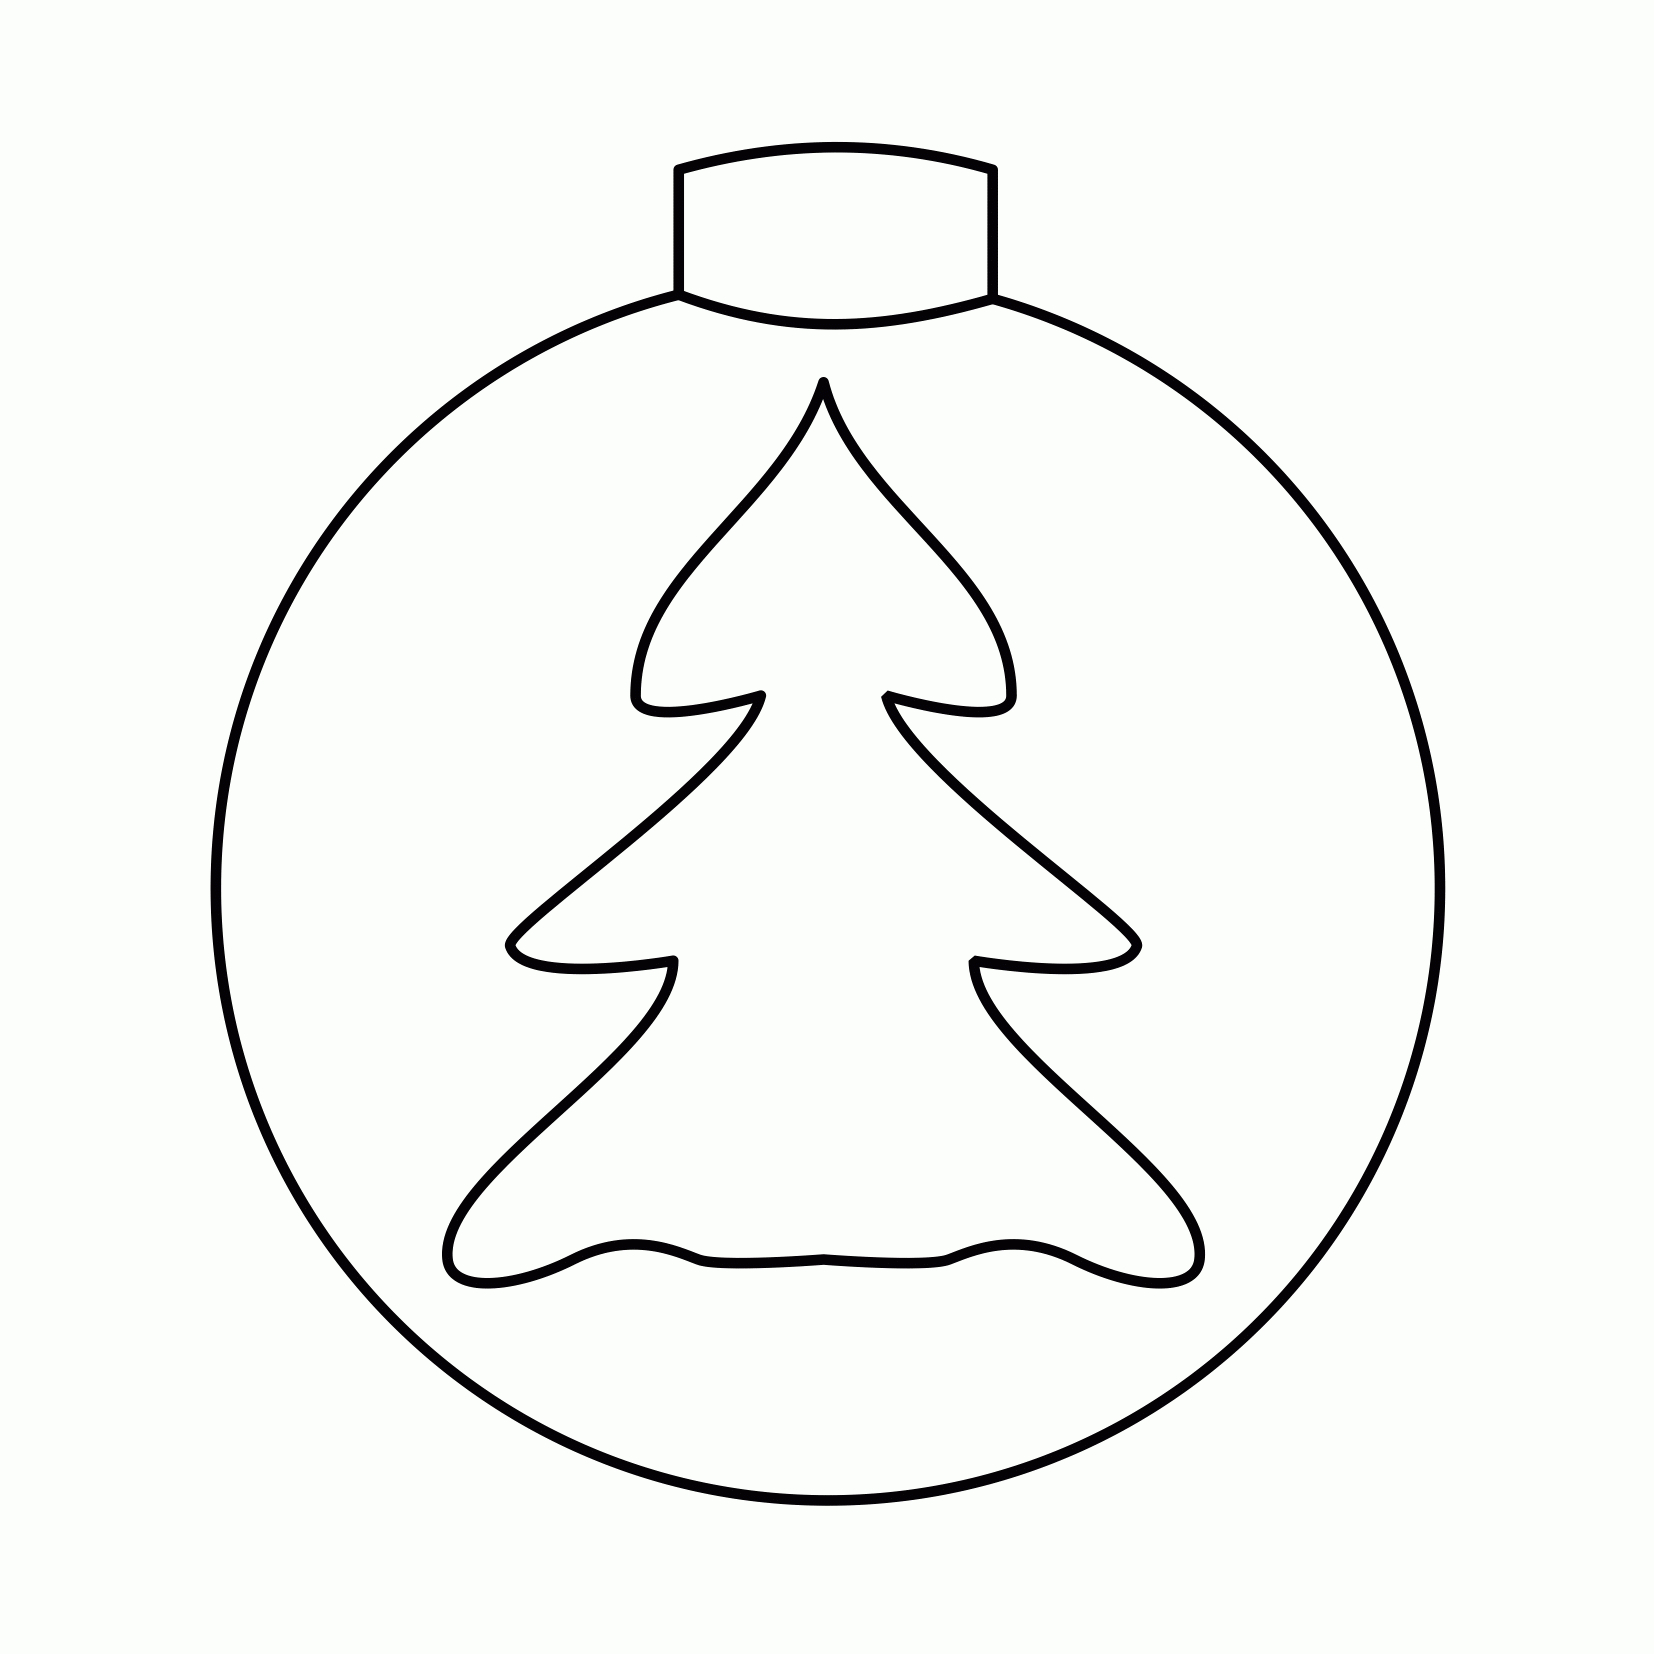 Coloring ~ Christmas Ornaments To Color Beautiful Printable Coloring - Free Printable Ornaments To Color